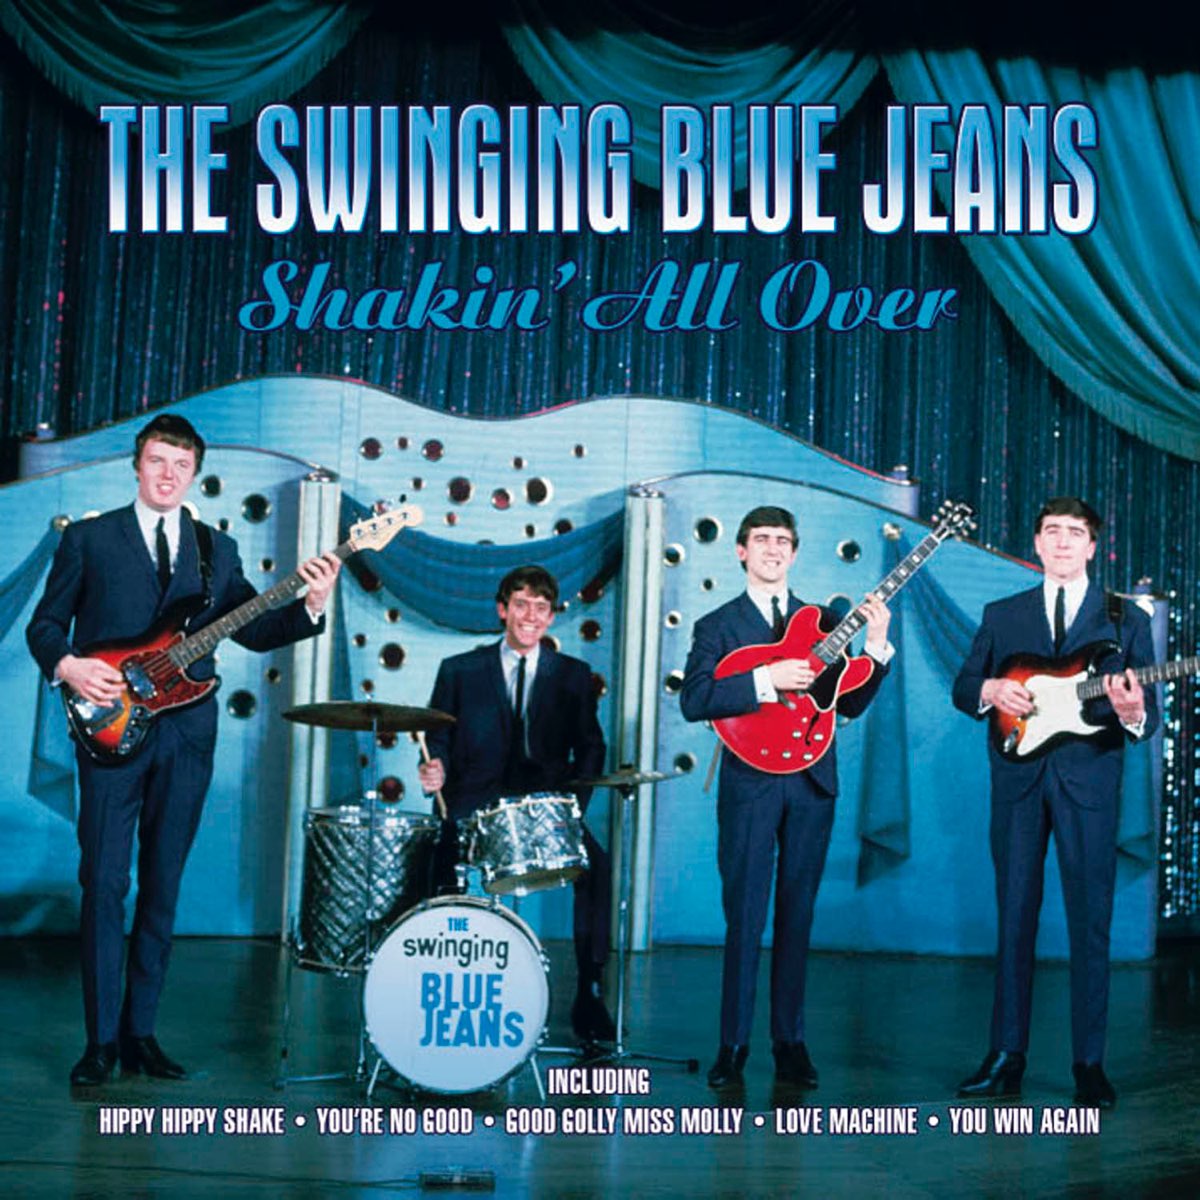 Shakin' All Over - Album by The Swinging Blue Jeans - Apple Music